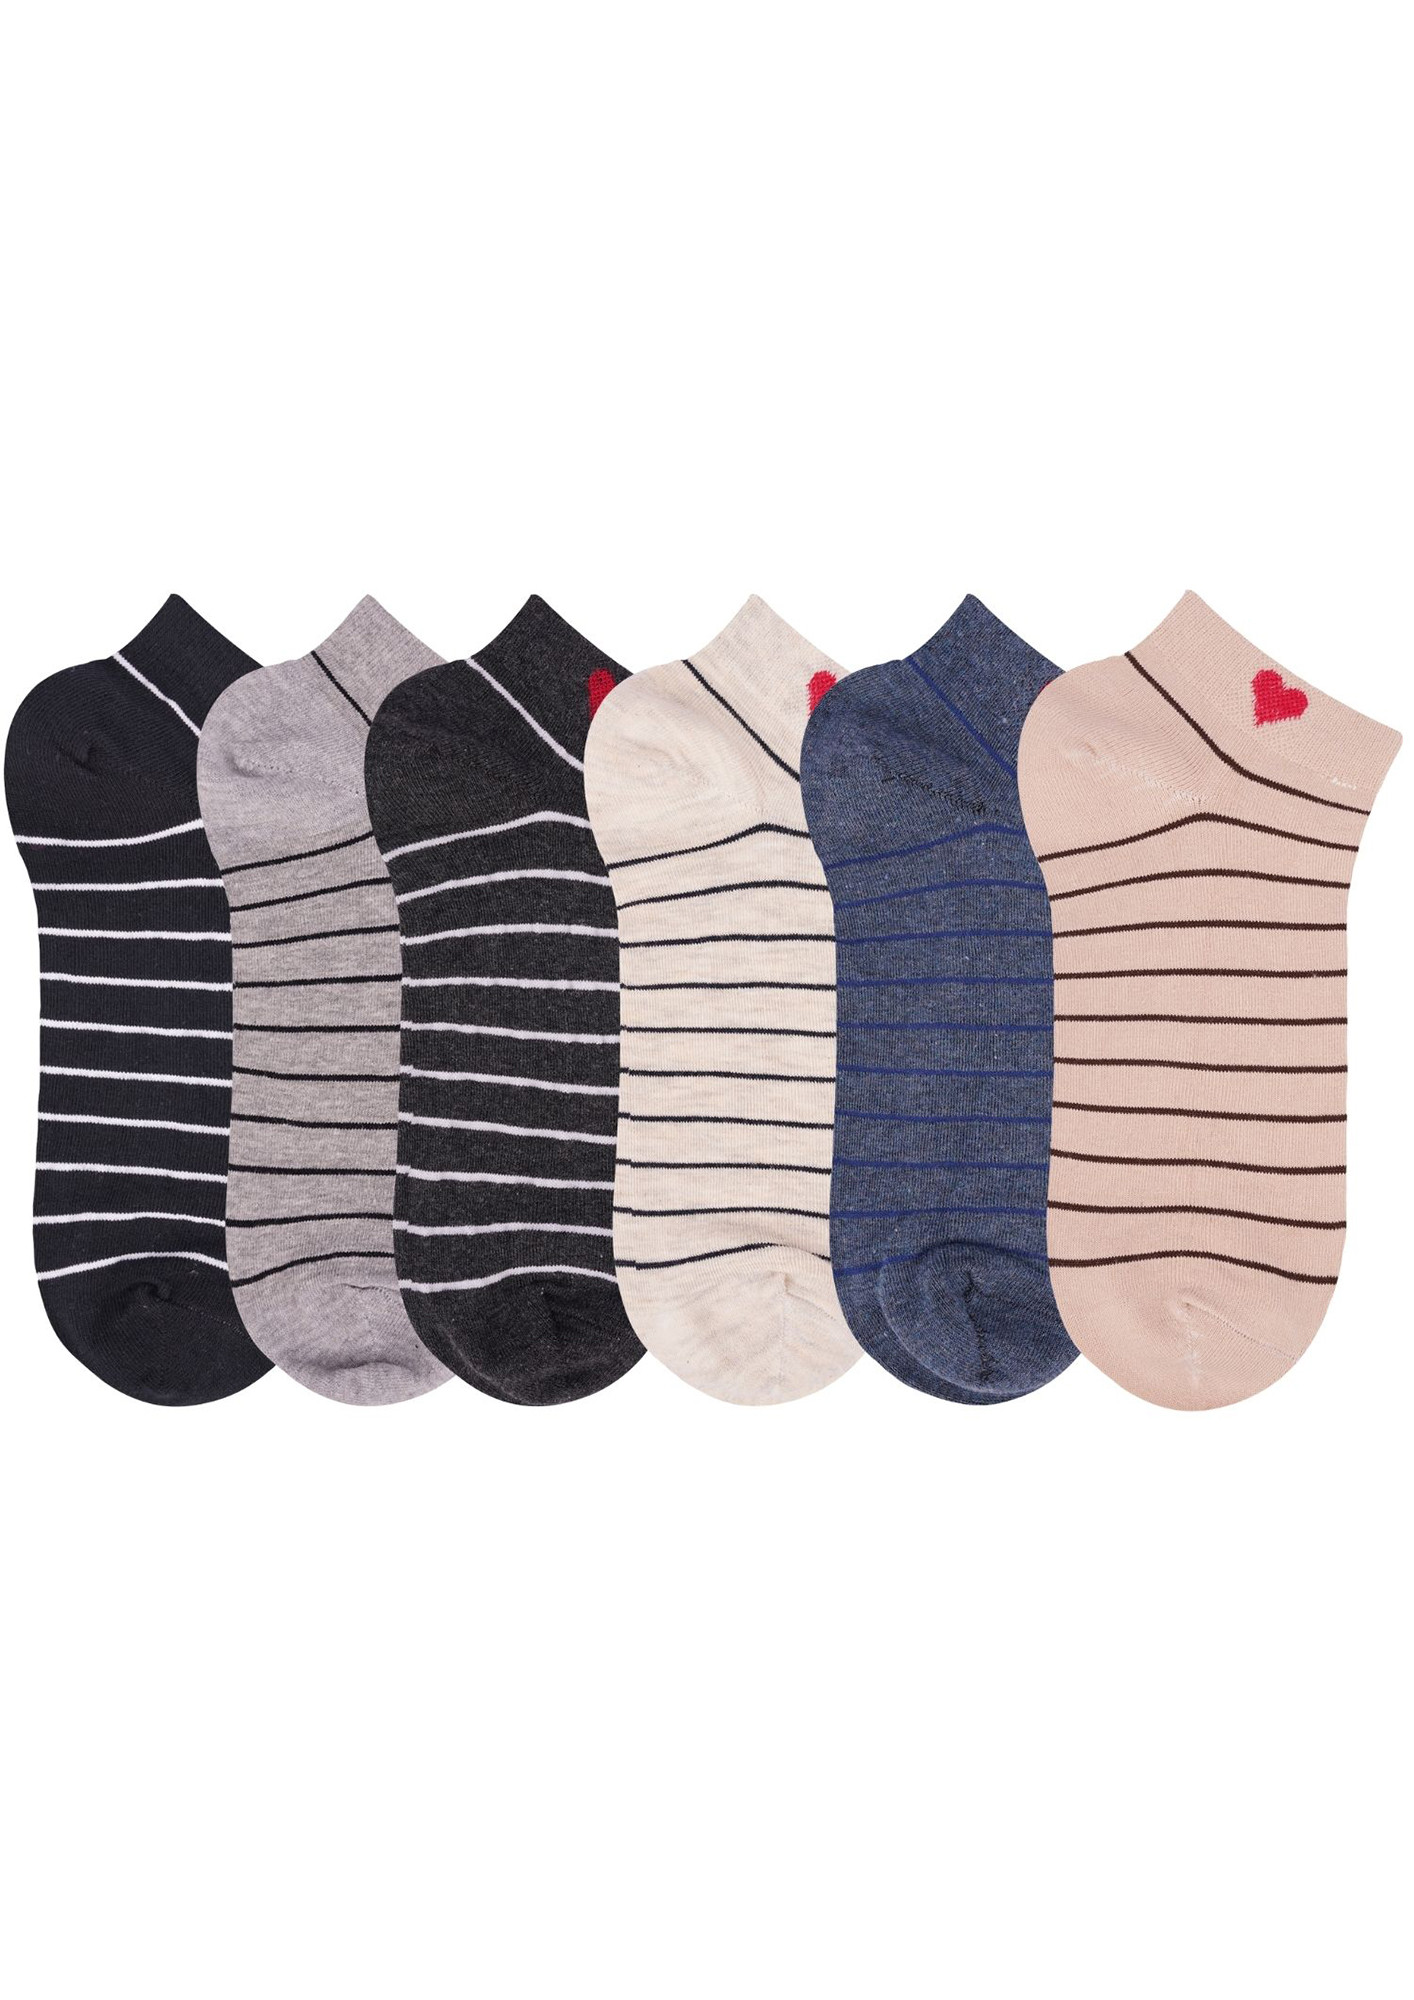 N2S NEXT2SKIN Women's Low Ankle Length Striped Pattern Cotton Socks - Pack of 6 Pairs, Multicolor